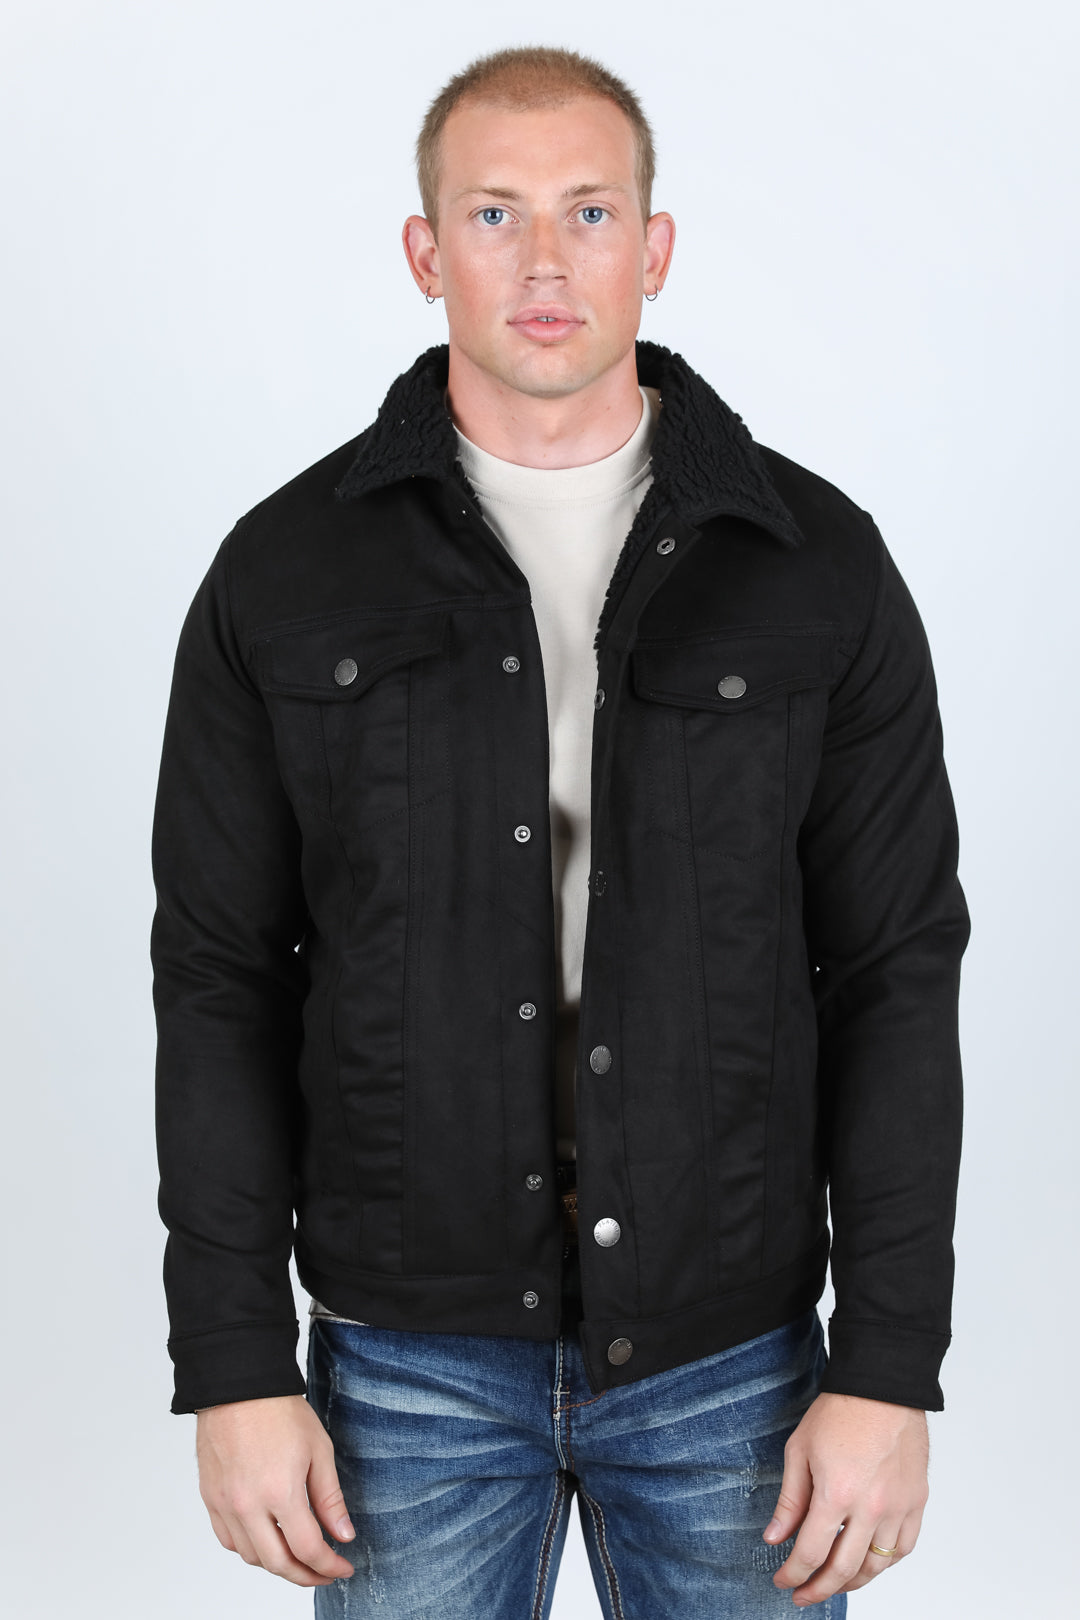 Mens Sherpa Lined Faux Suede Jacket - Black